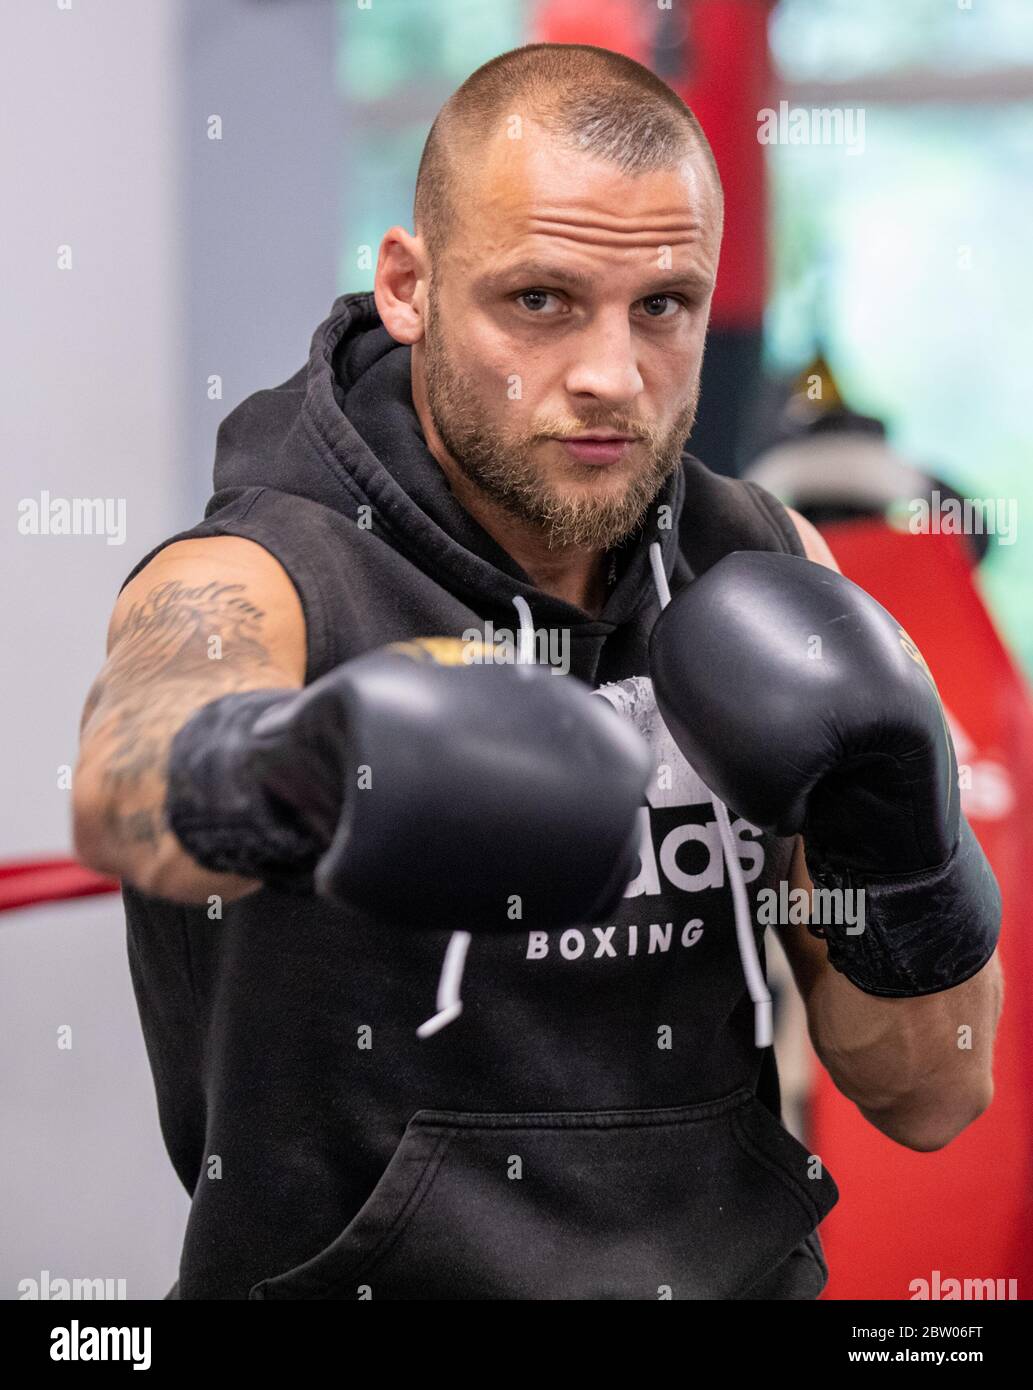 Berlin Germany 28th May Boxing Middleweight Ebu Eu Boxer Bjorn Schicke Prepares For His Middleweight Title Fight In The Gym He Will Defend His Ebu Eu Title On June 12 Under Strict Hygiene